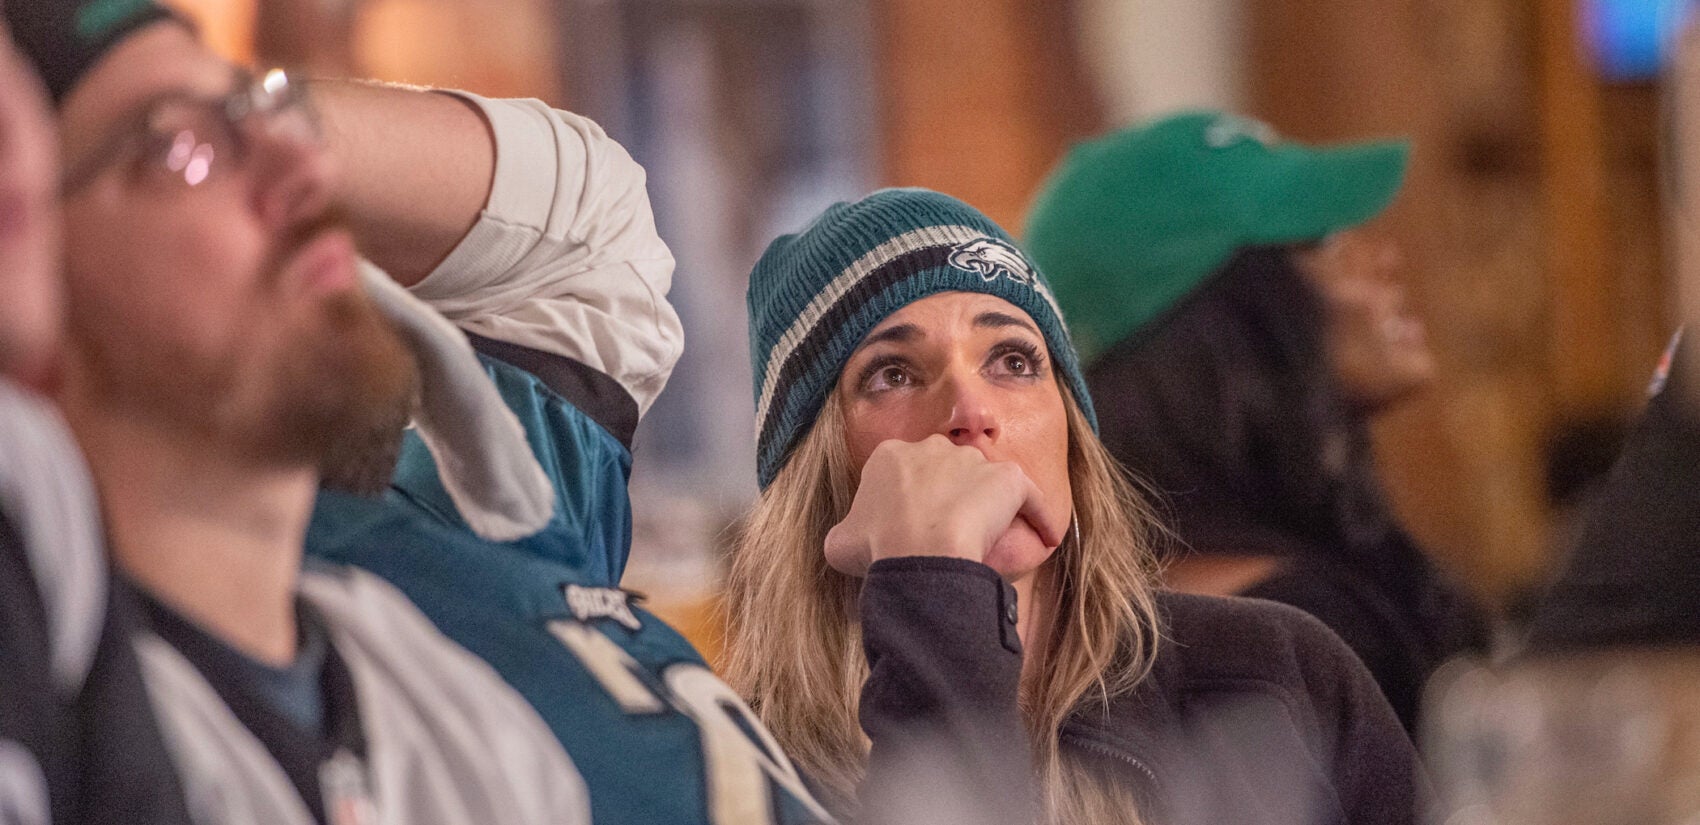 Eagles fans watching the game on TV